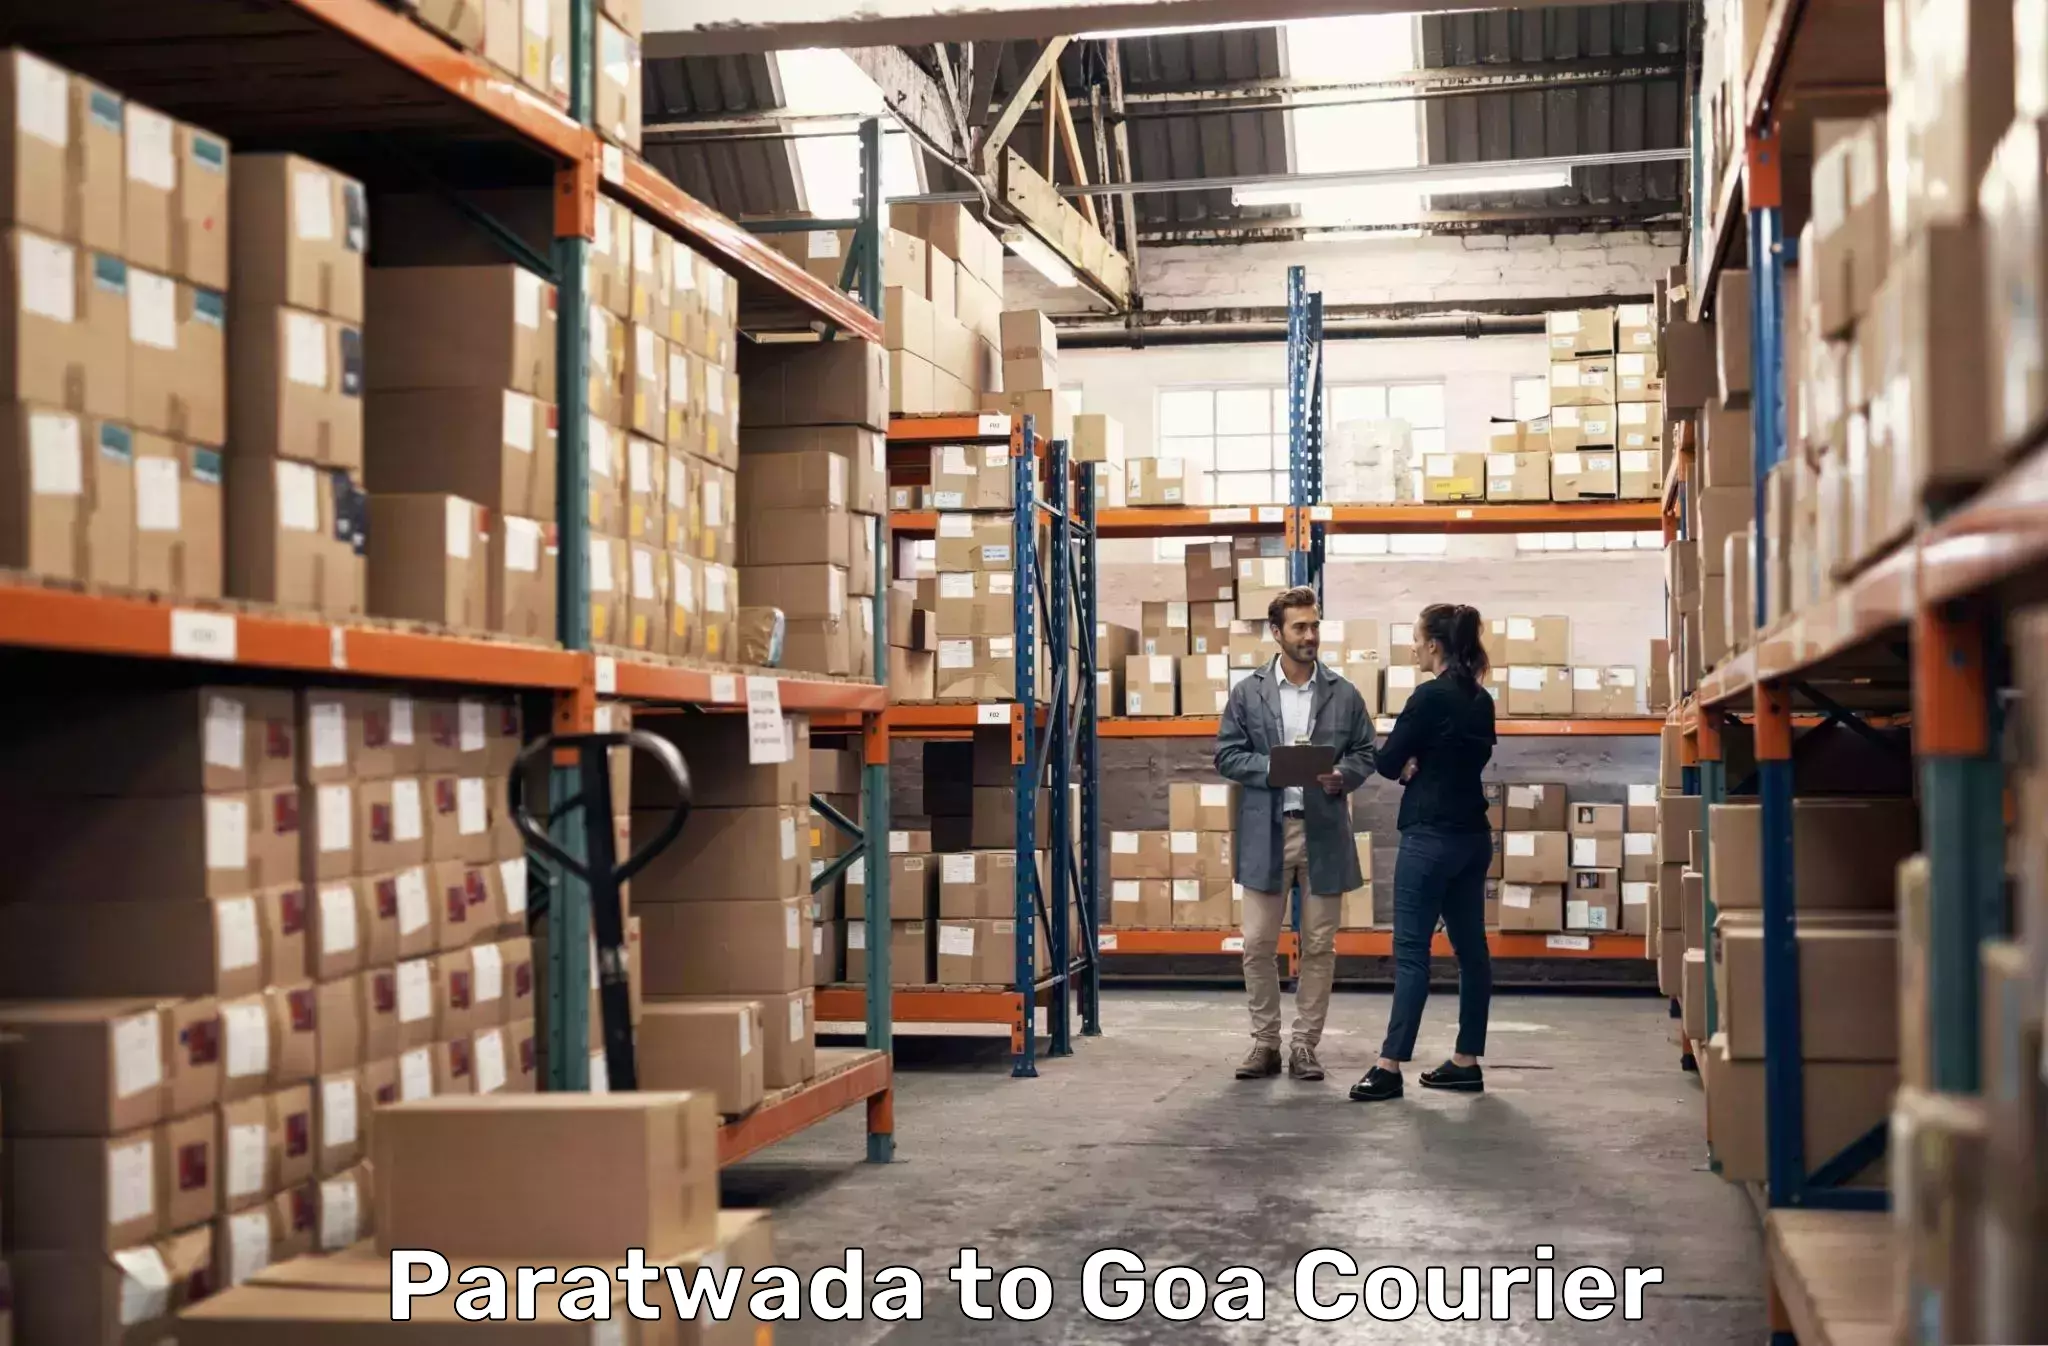 Customizable delivery plans Paratwada to Panaji